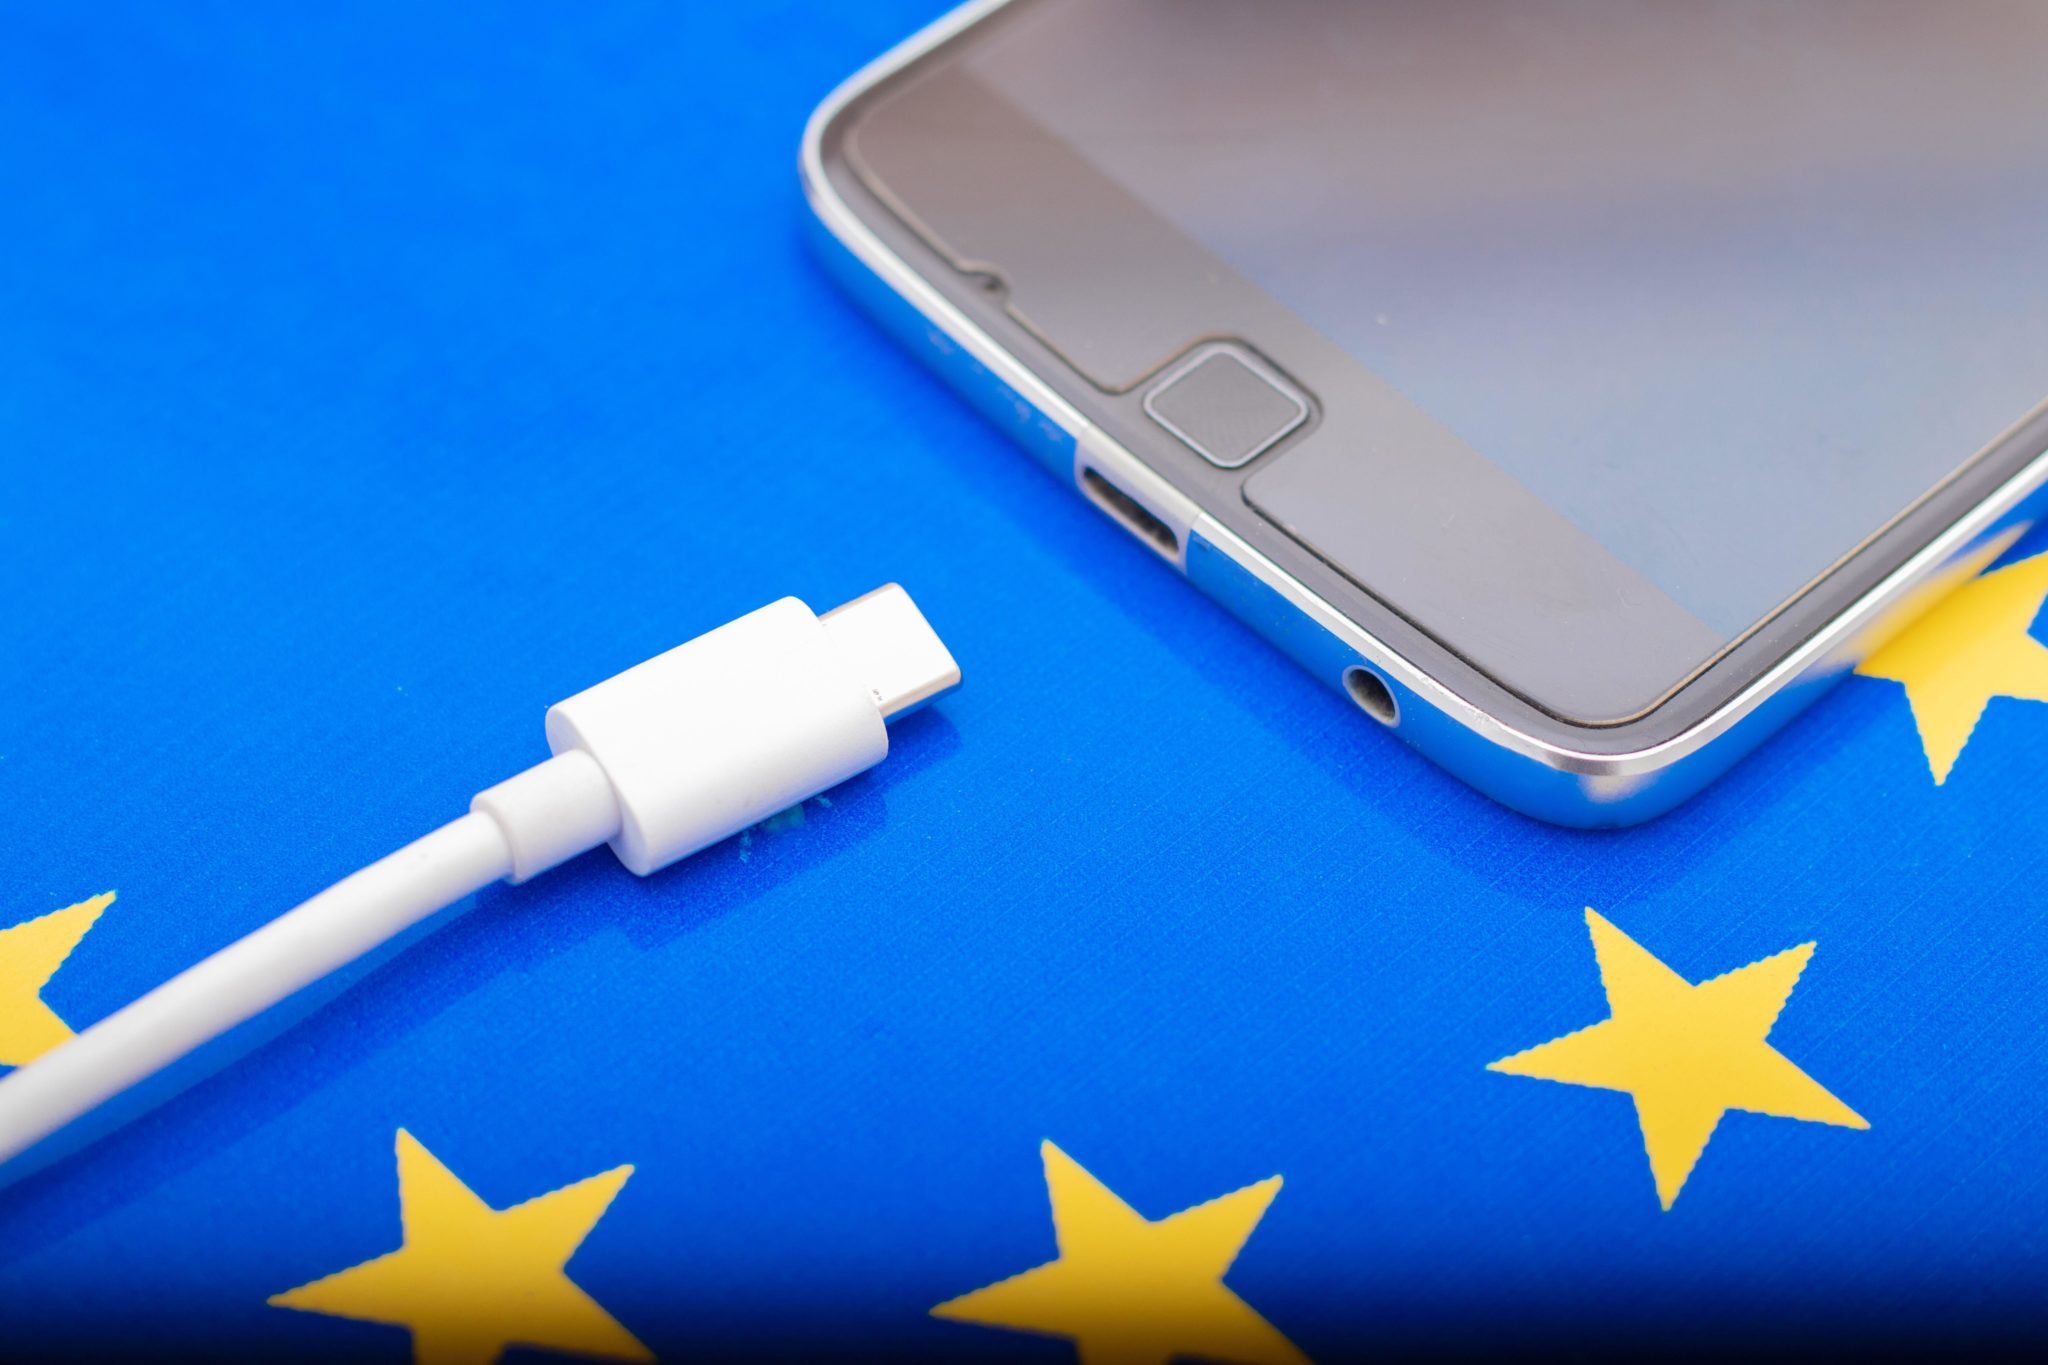 Close up of a mobile phone Charger with a USB Type - C cord on an EU flag.